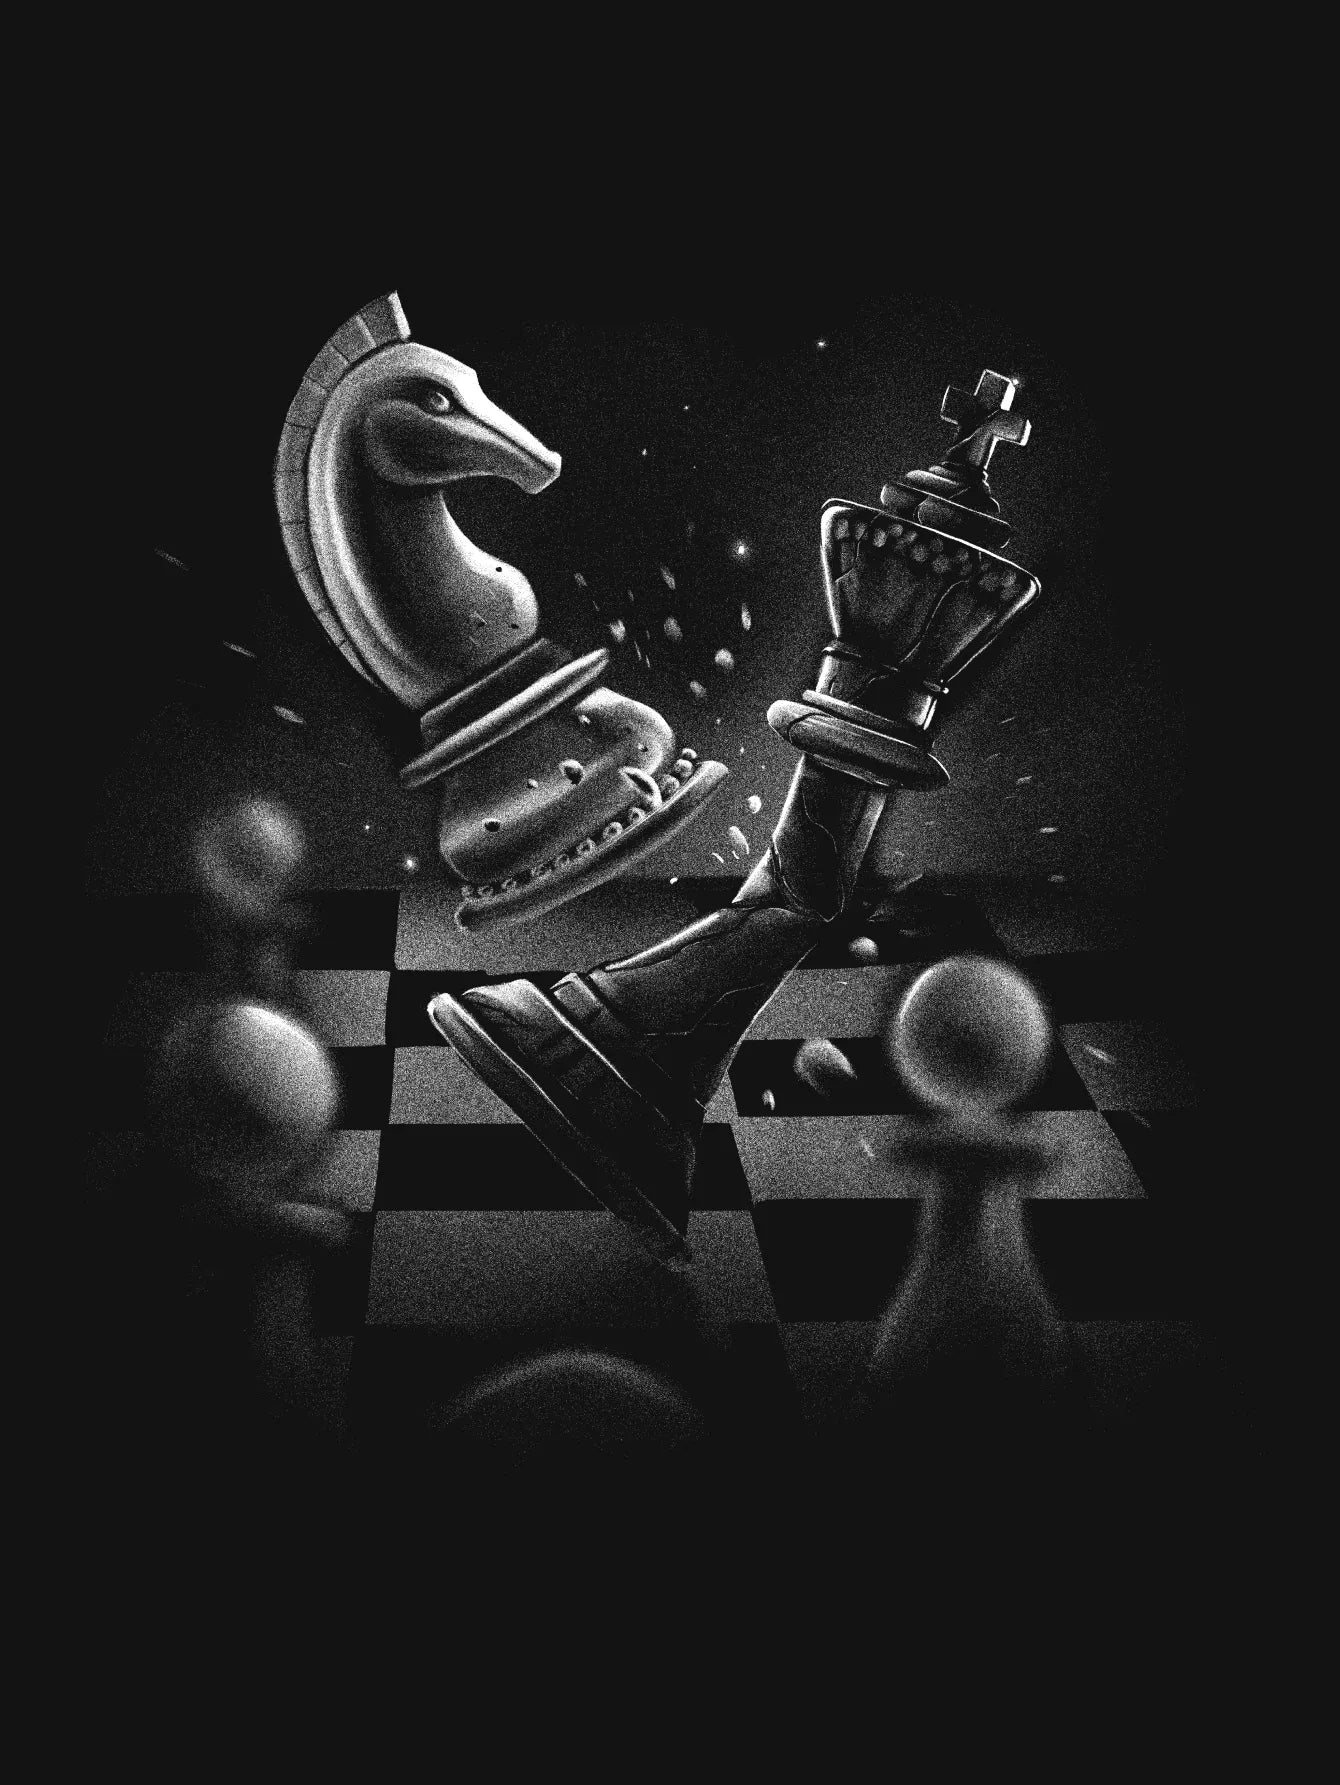 A Chess Game in a Realistic Monochromatic Style